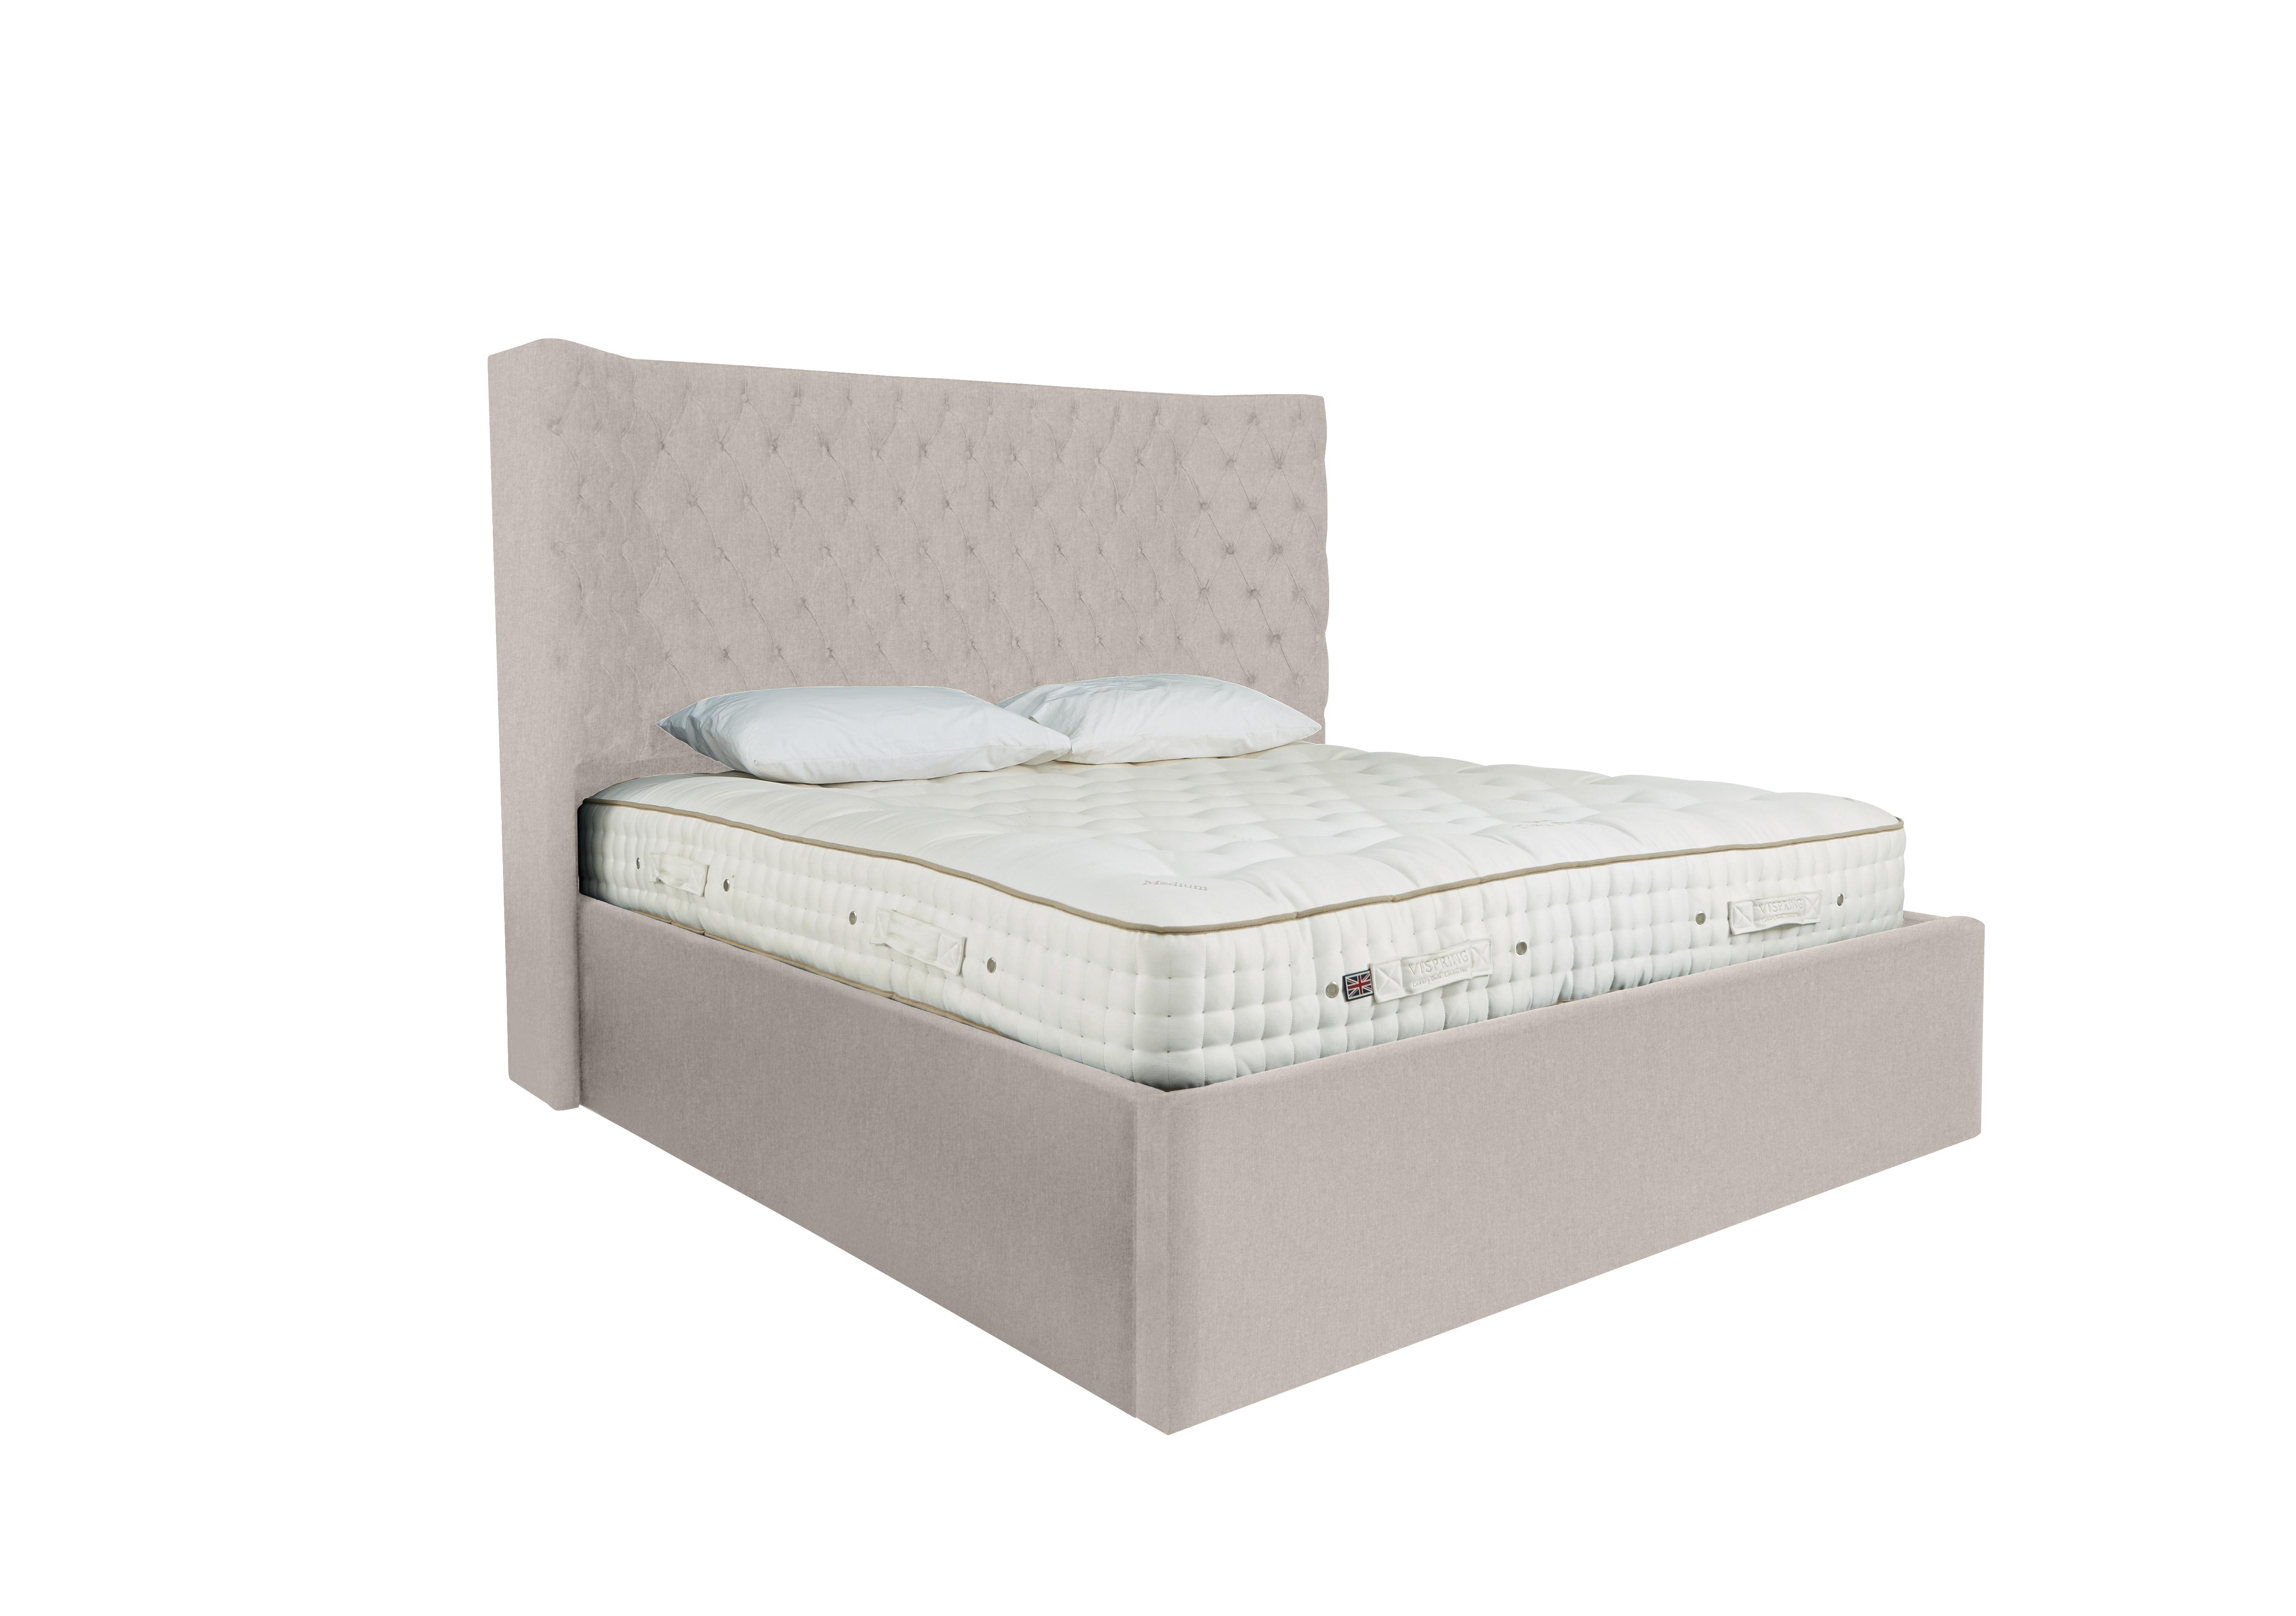 Maximus Bed Frame in Linnet Clay on Furniture Village